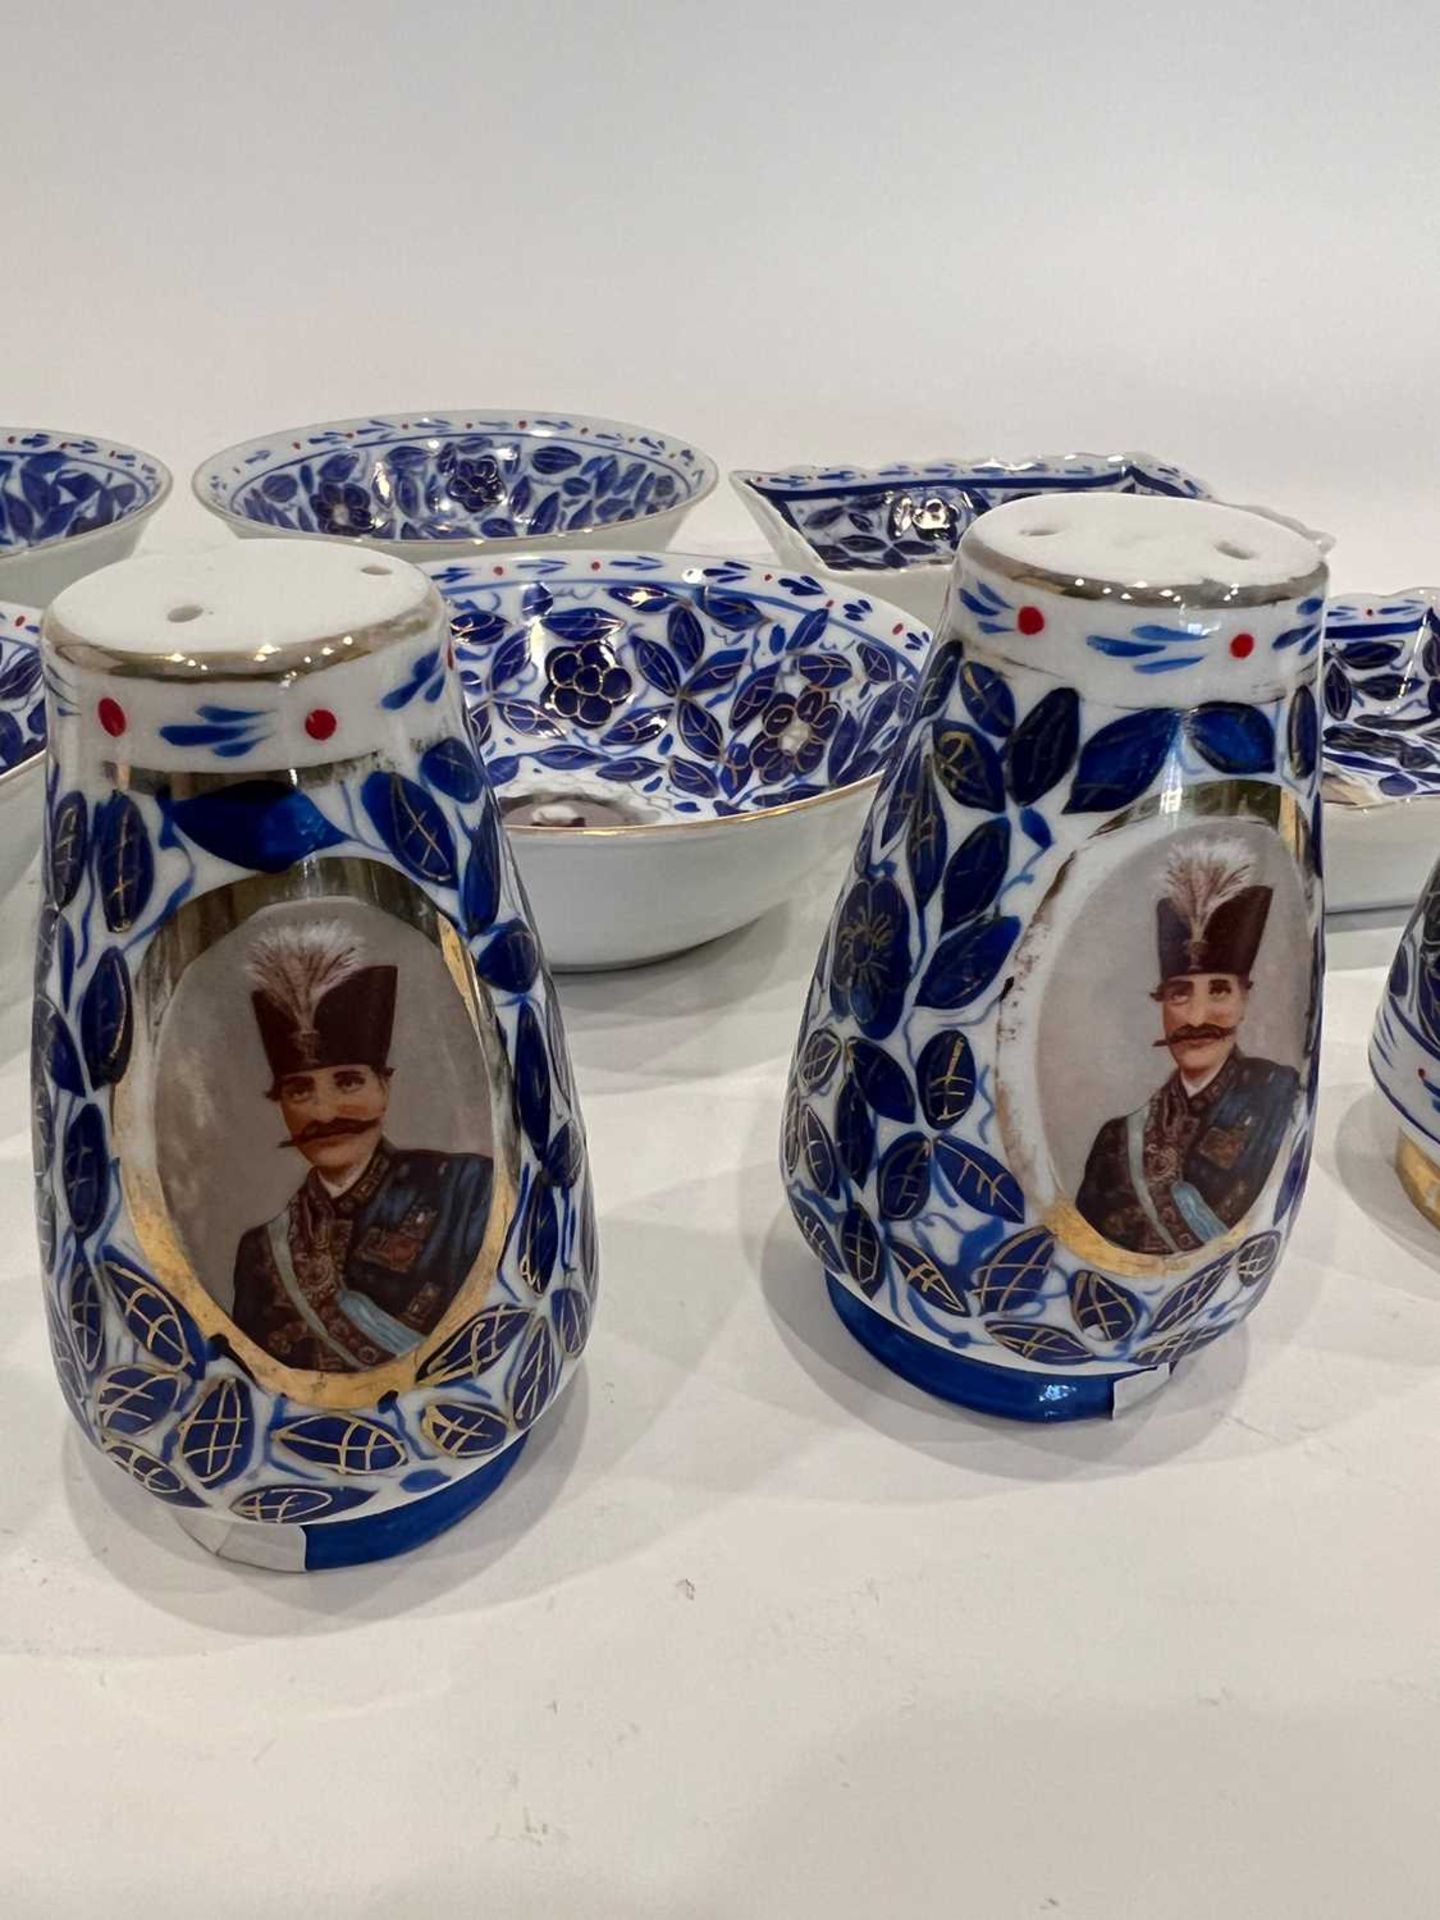 A RUSSIAN PORCELAIN SALT AND PEPPER SET TOGETHER WITH OTHER ITEMS MADE FOR THE PERSIAN MARKET - Image 2 of 5